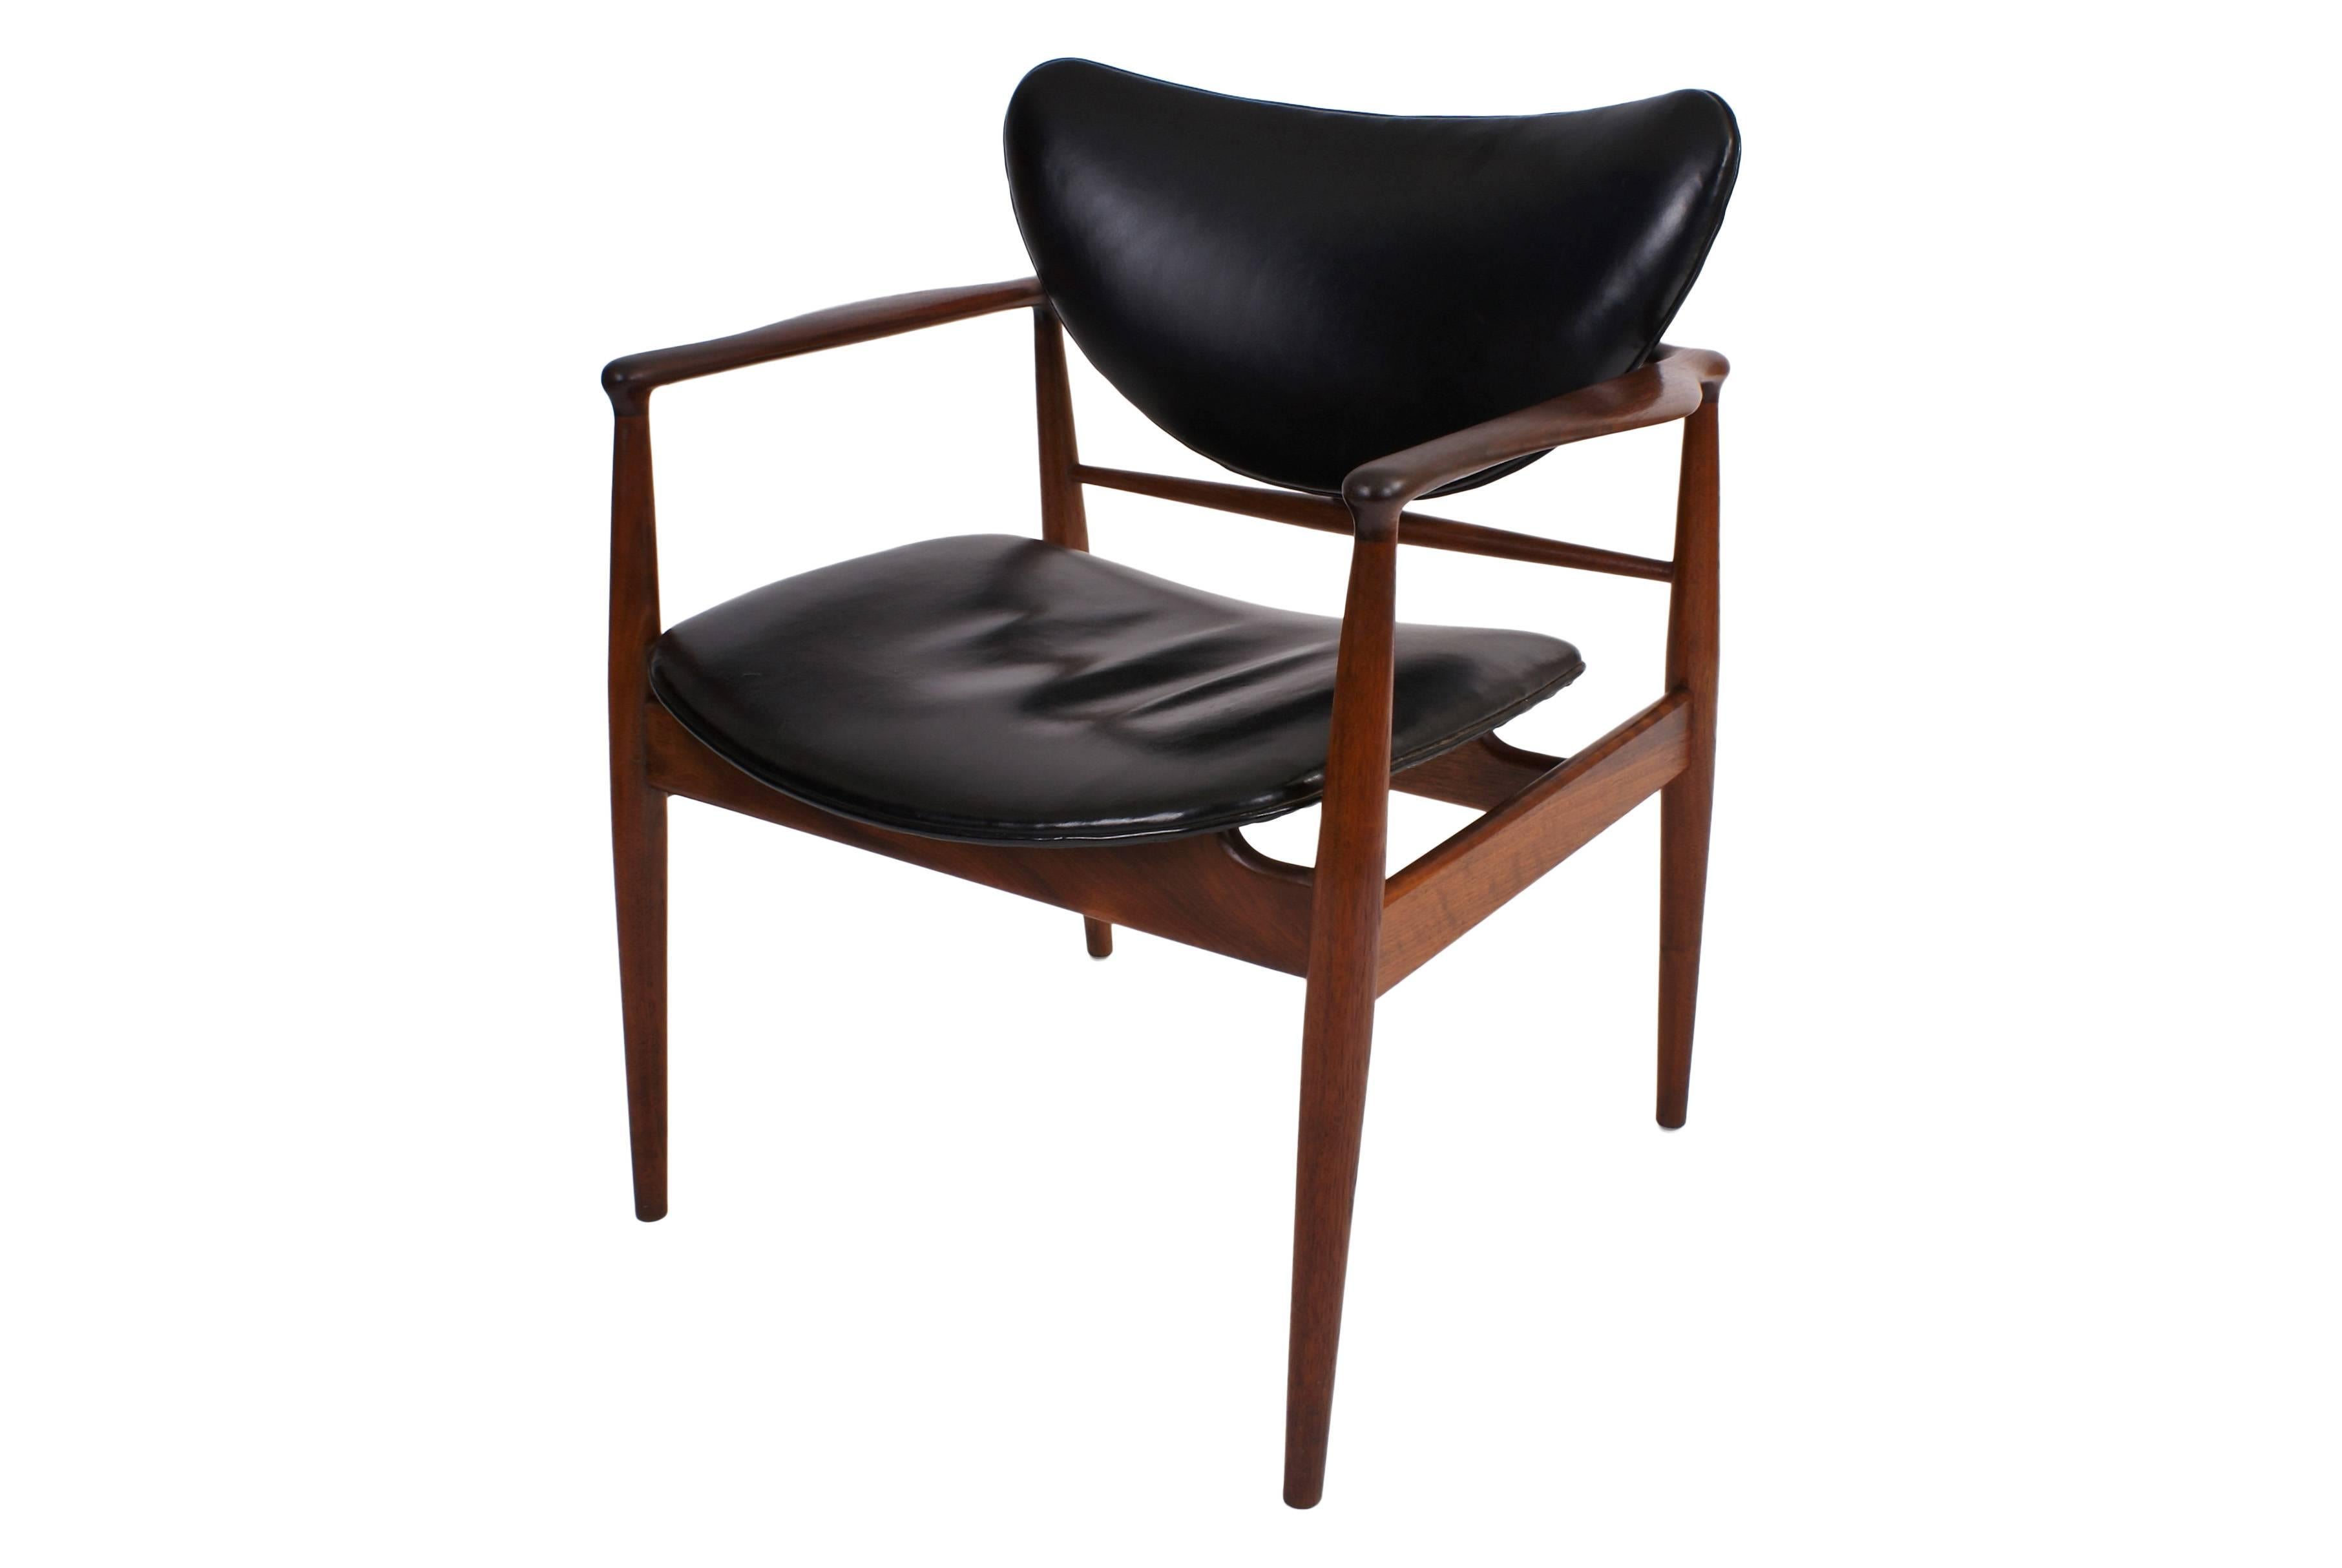 Set of four Finn Juhl FJ-48 easy chairs in teak for Baker, USA, 1950s. Original black leather upholstery. Designed 1948.

Price is for the set of four chairs.